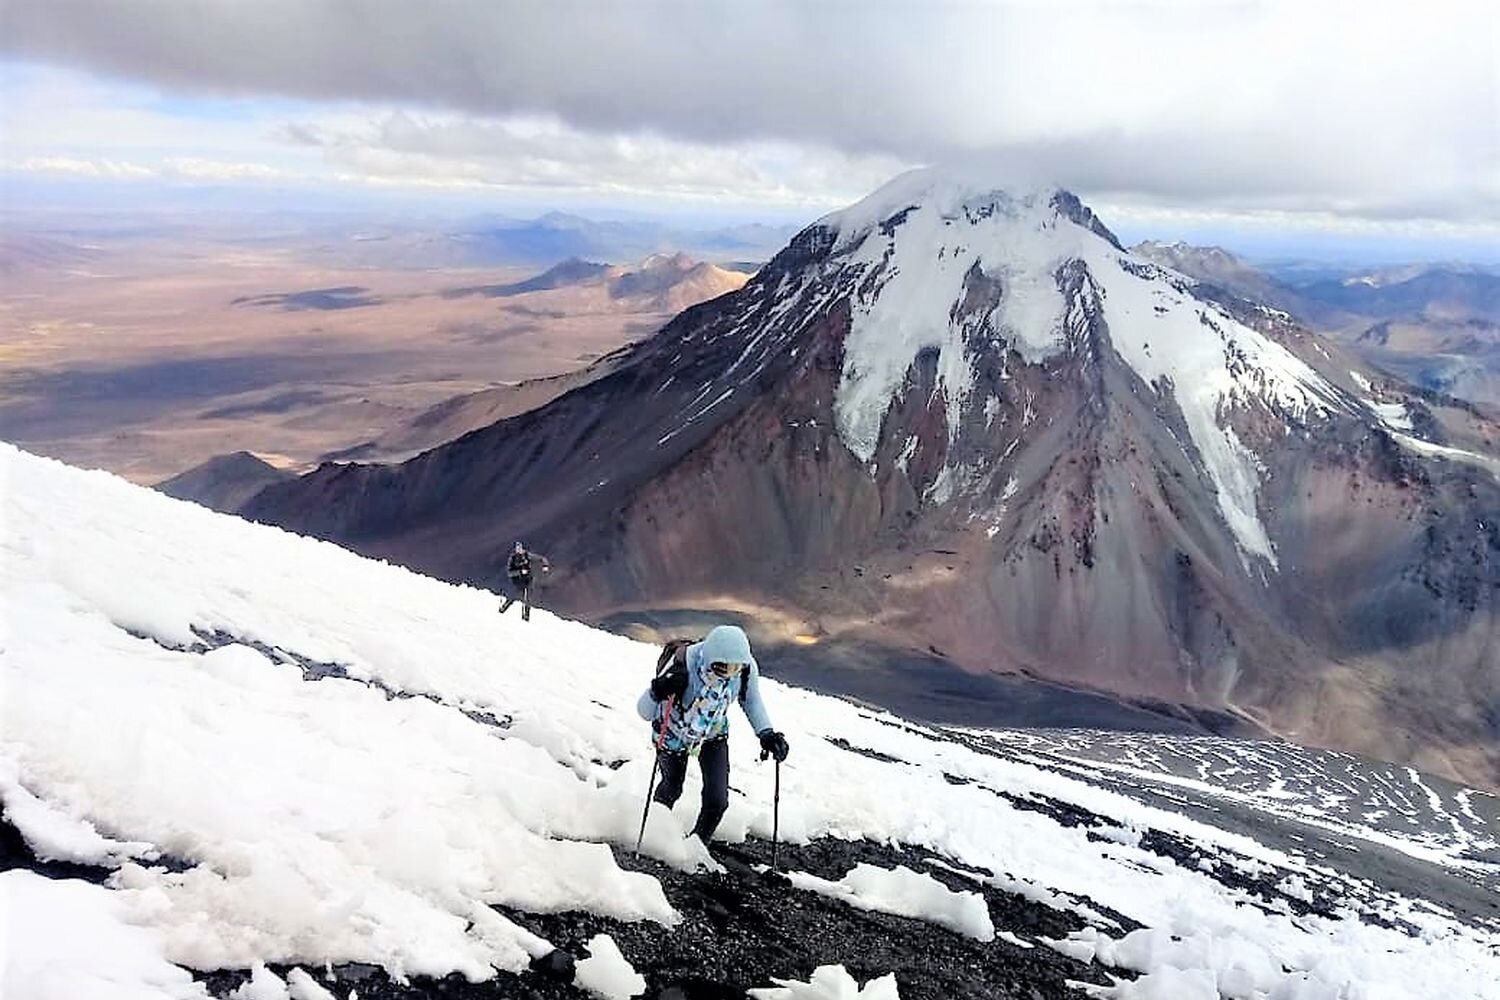  A climber on the way to the top of Parinacota volcano 